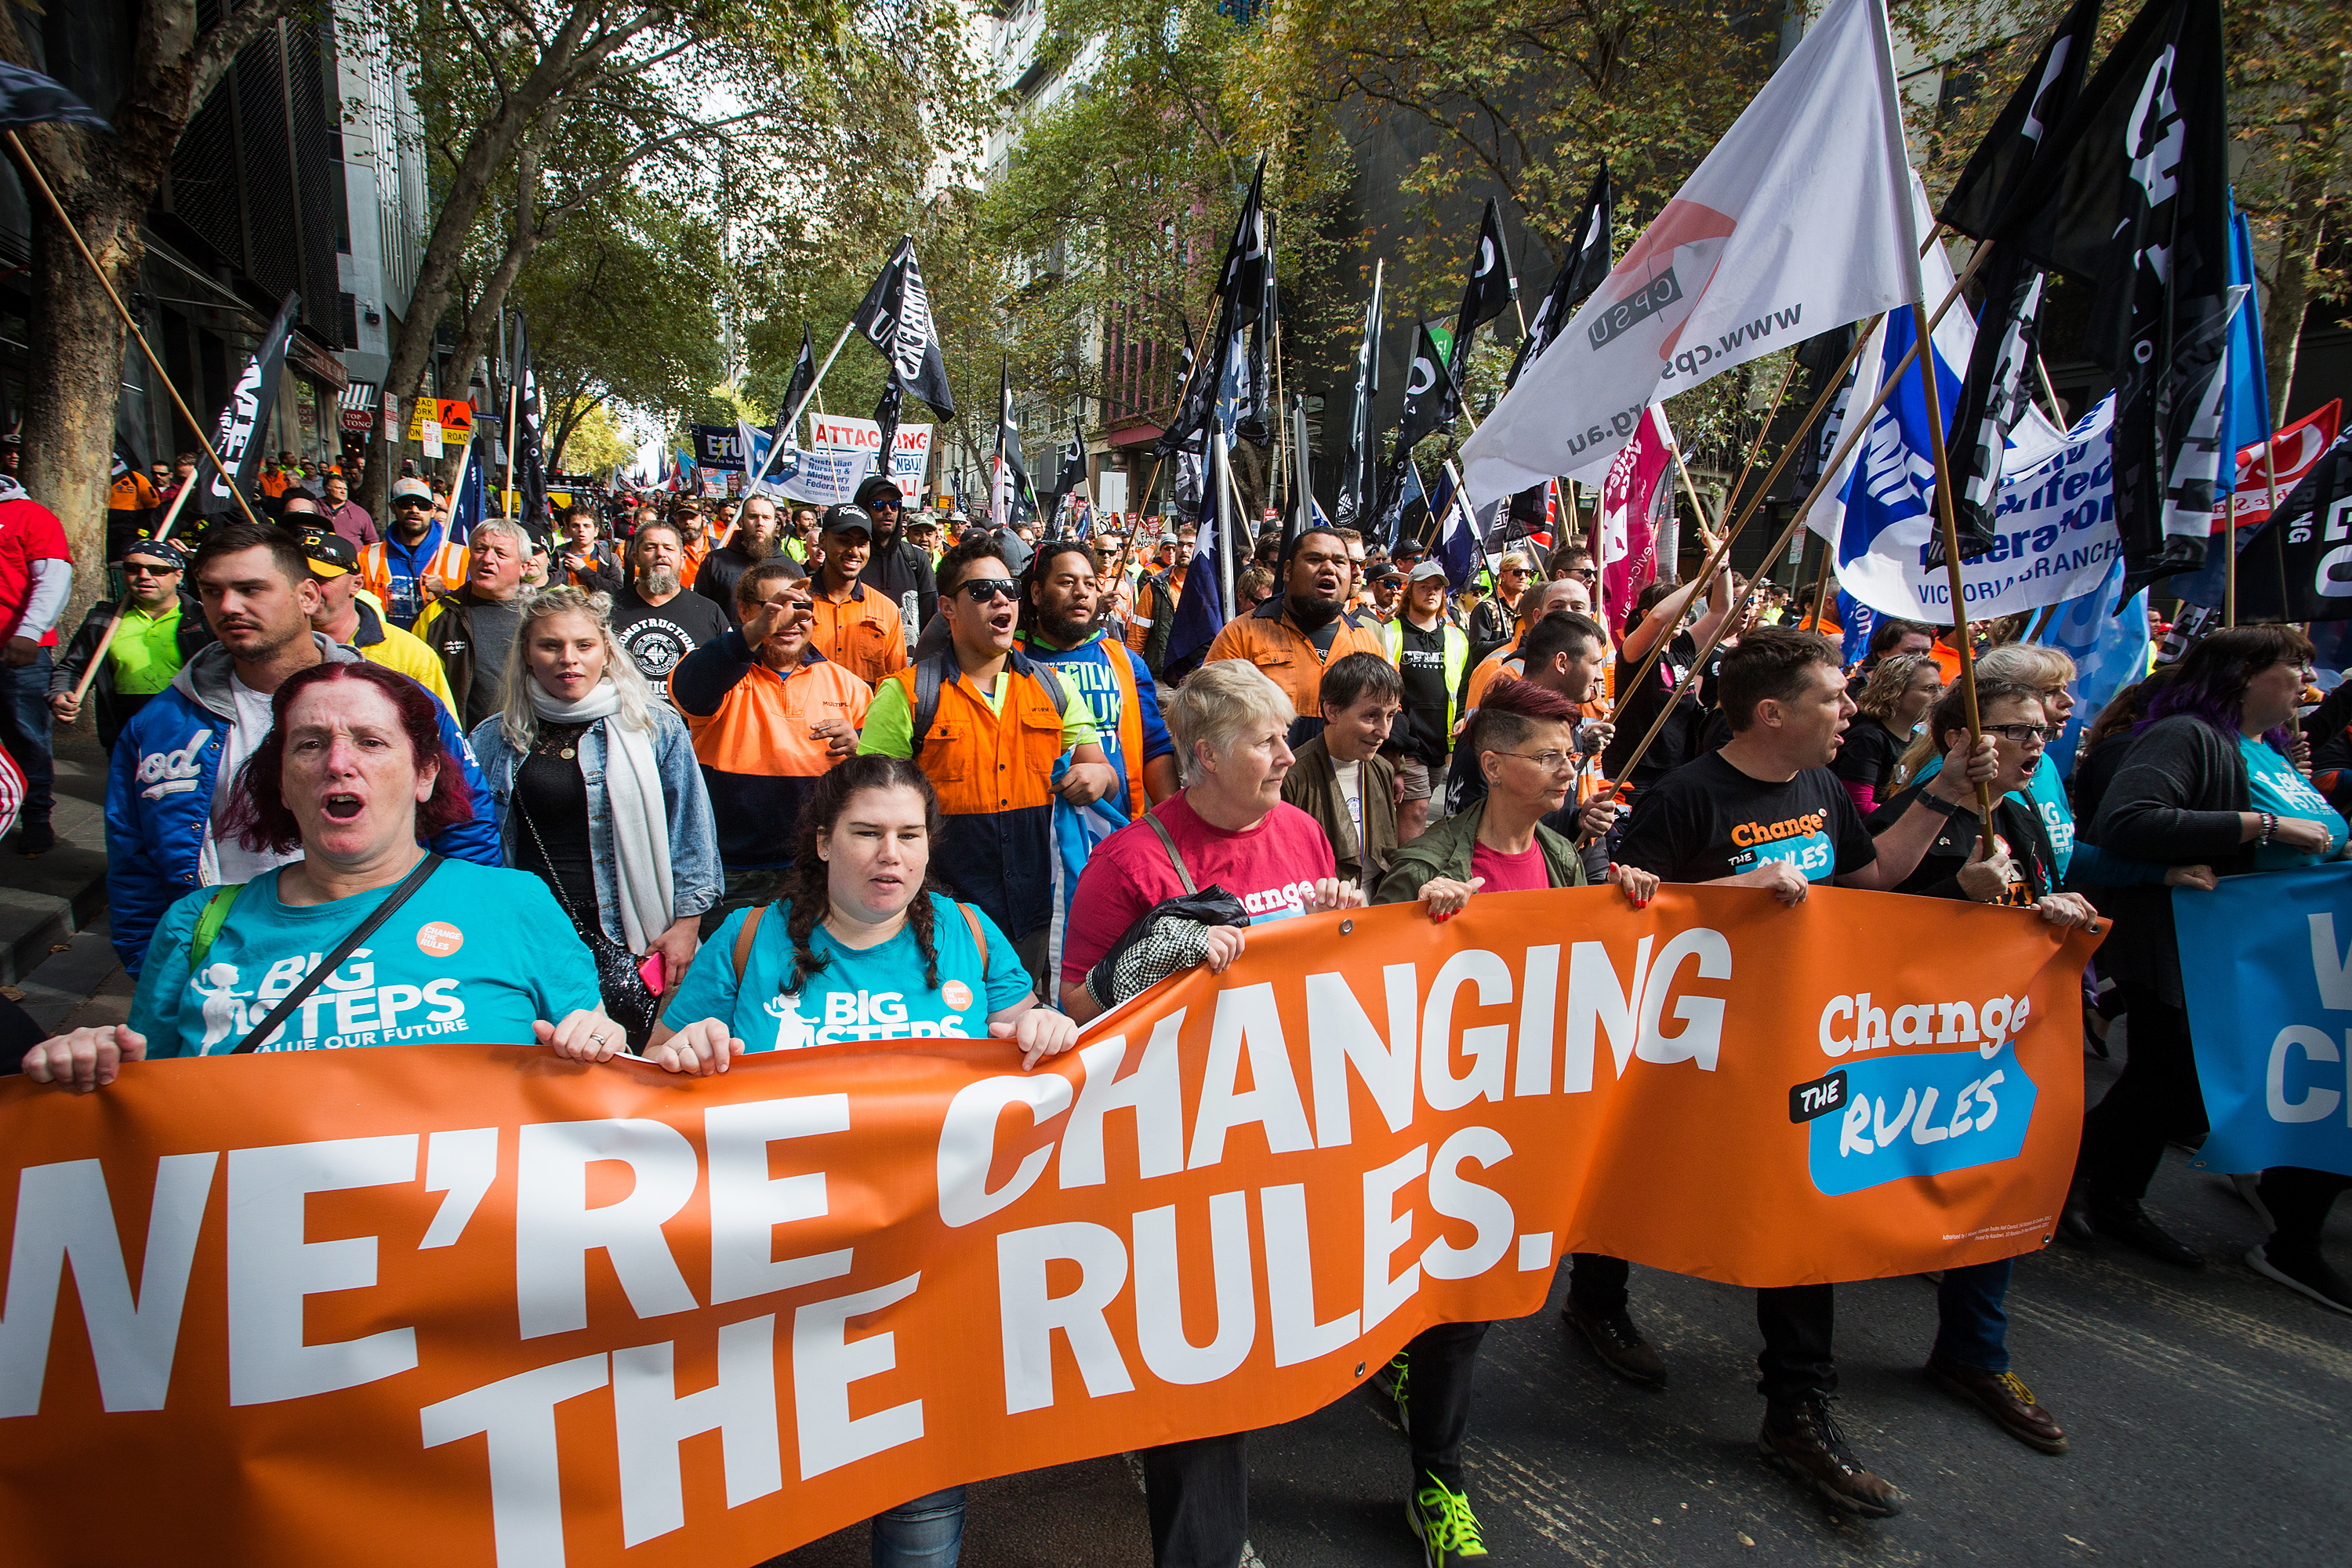 Change The Rules rally